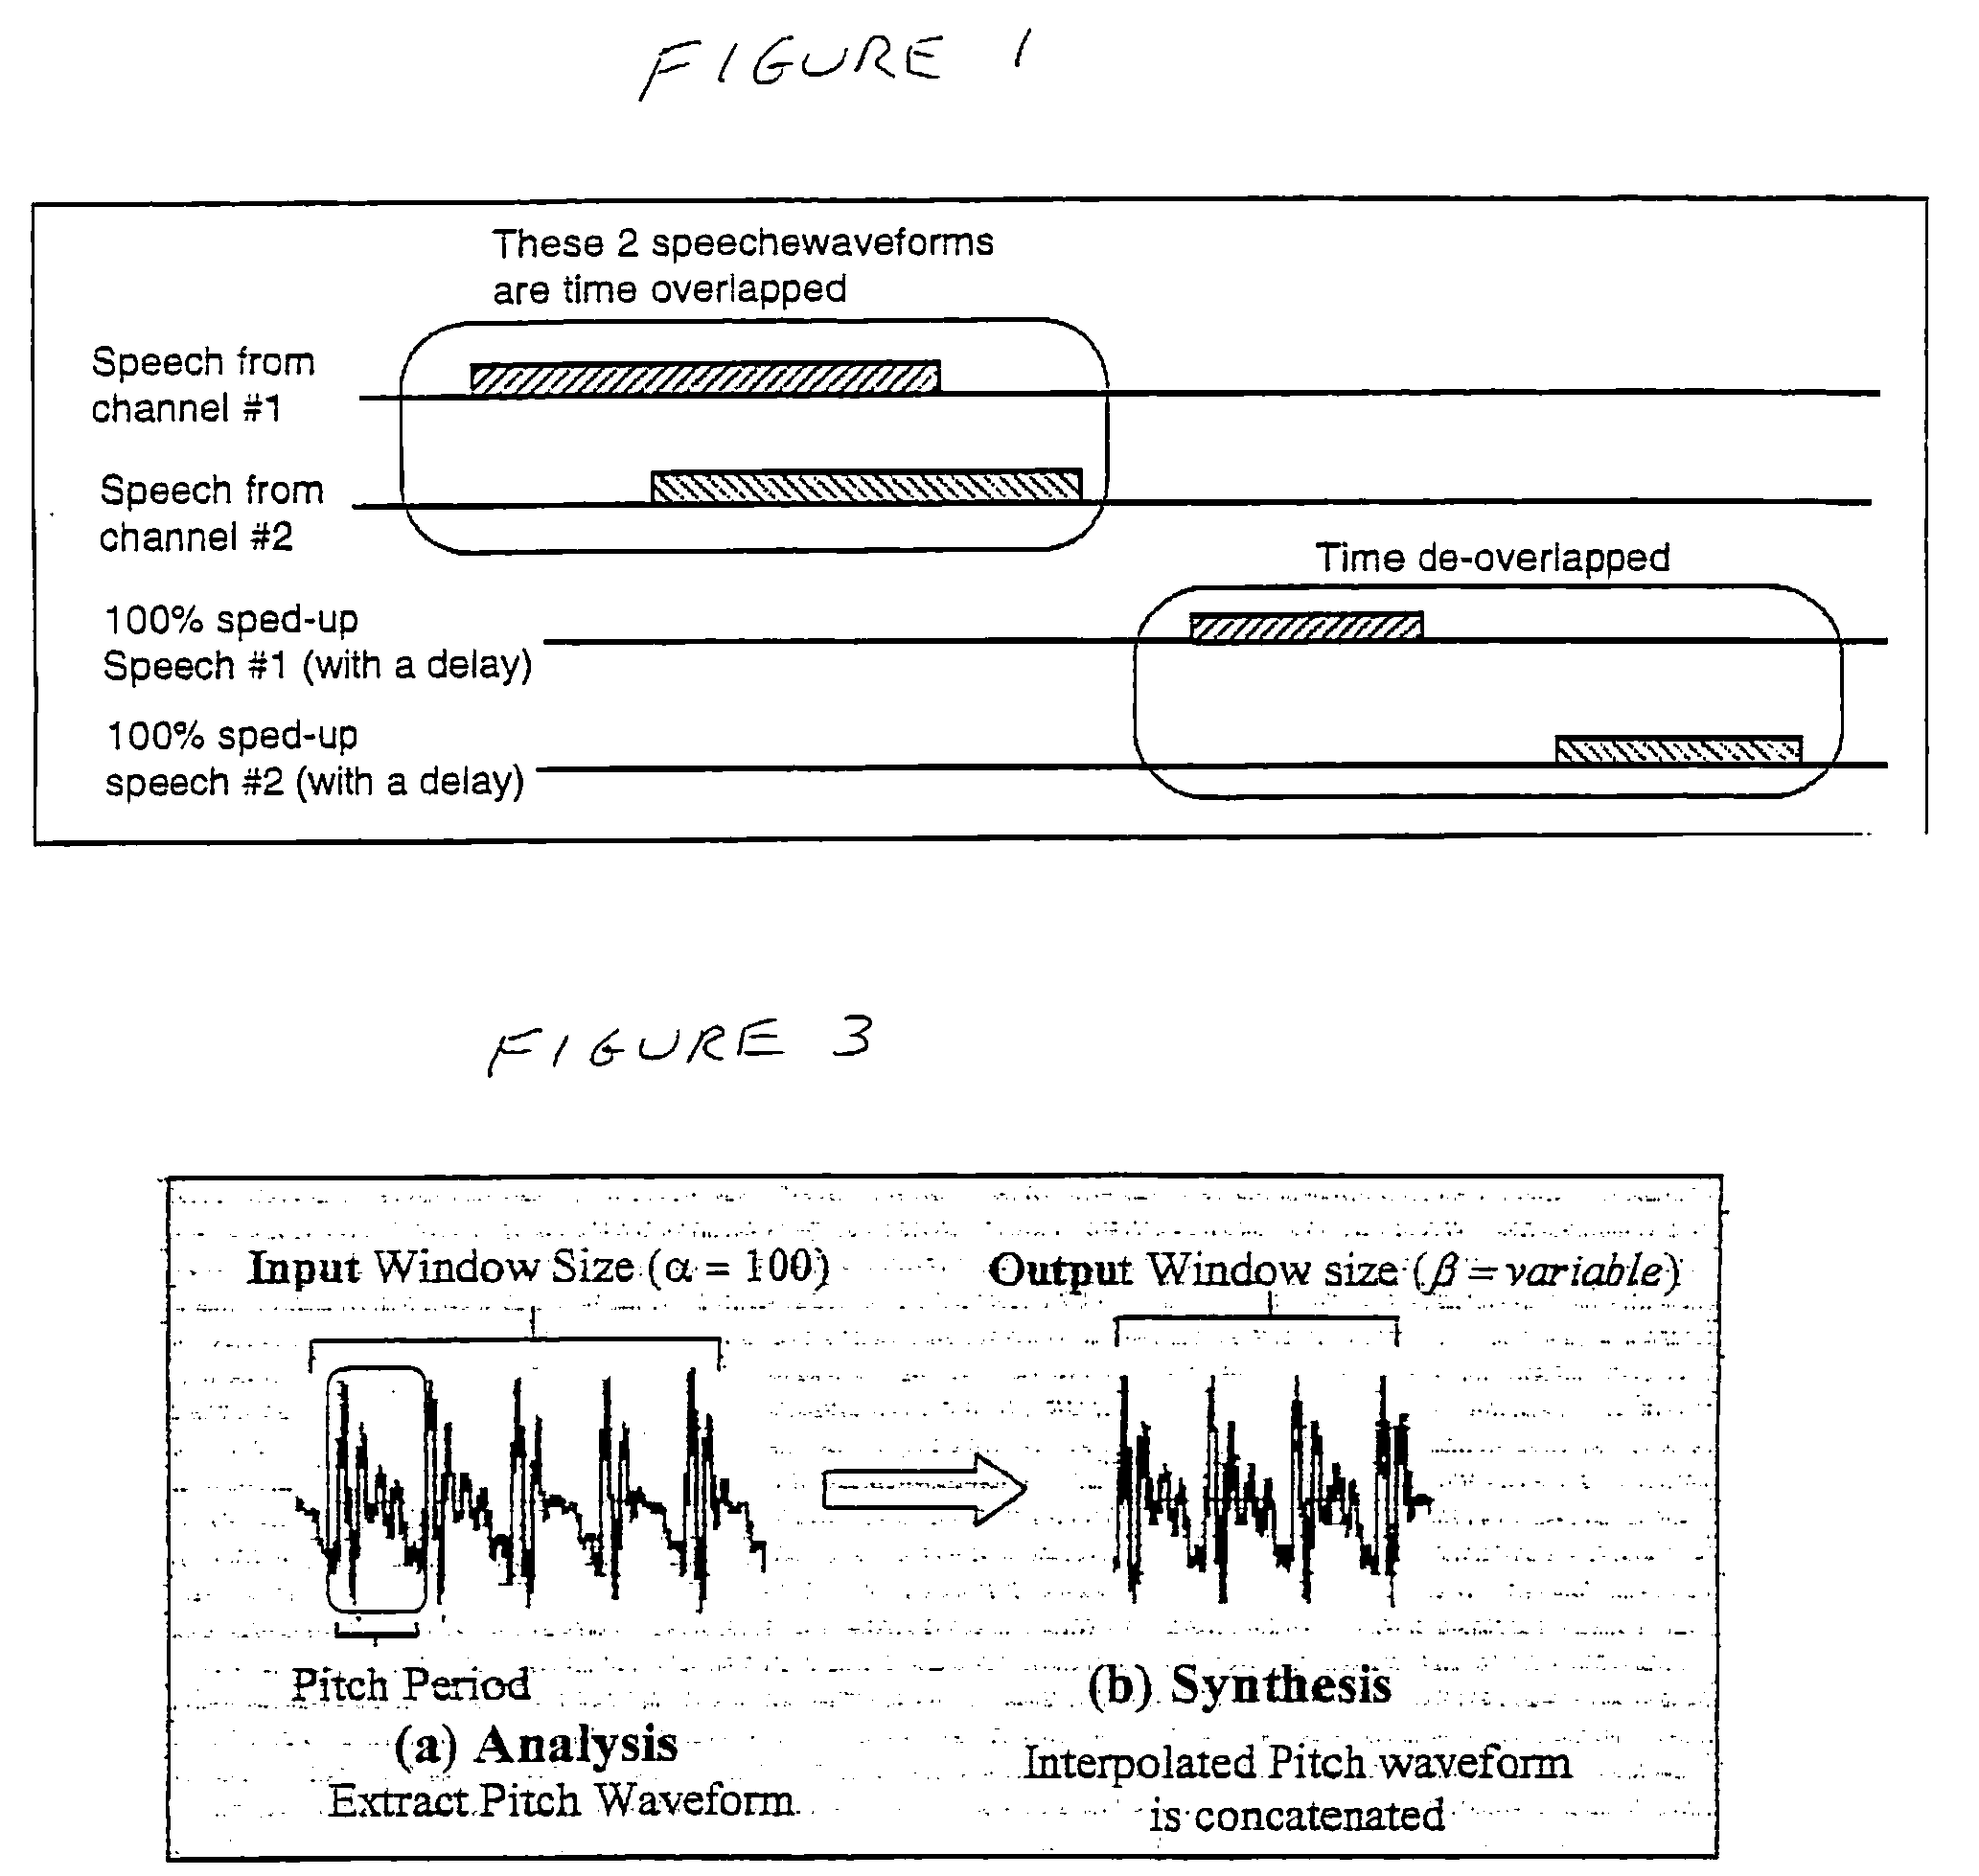 Method and apparatus for monitoring multichannel voice transmissions